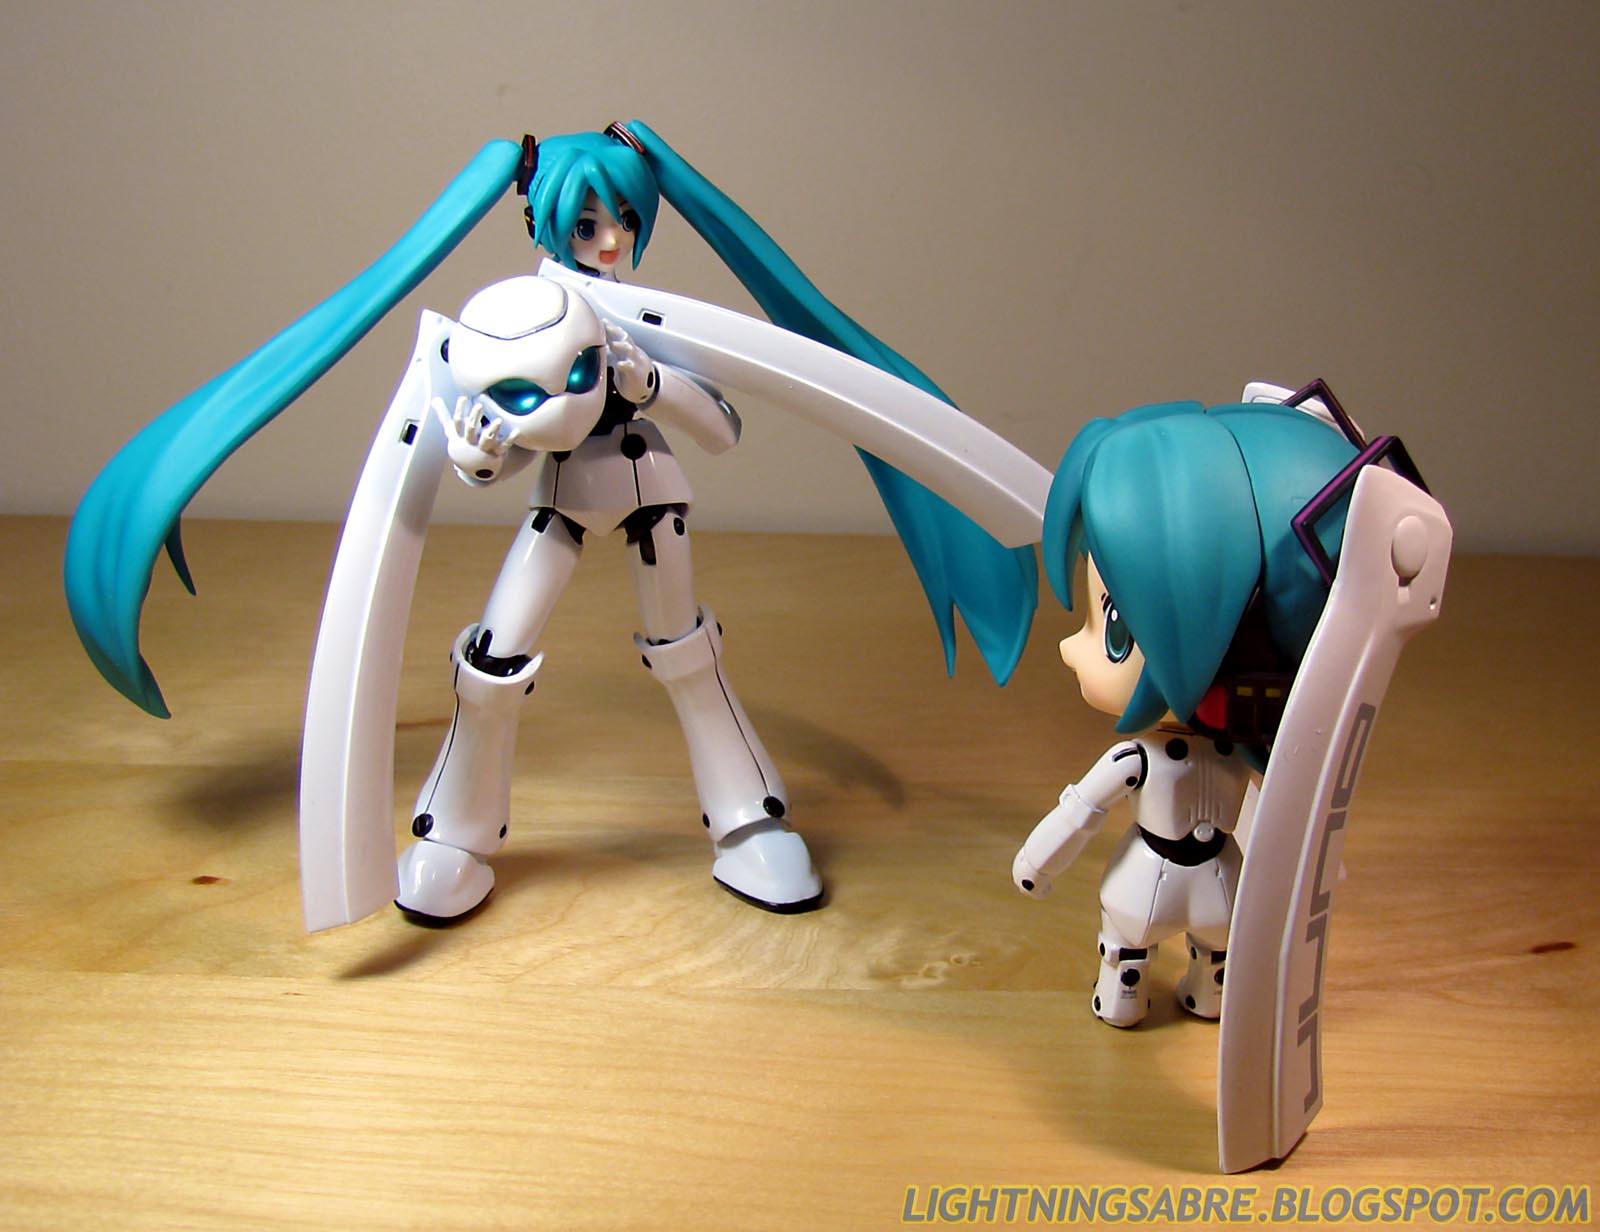 Within a Flash of Lightning: Iron Miku Suits Up